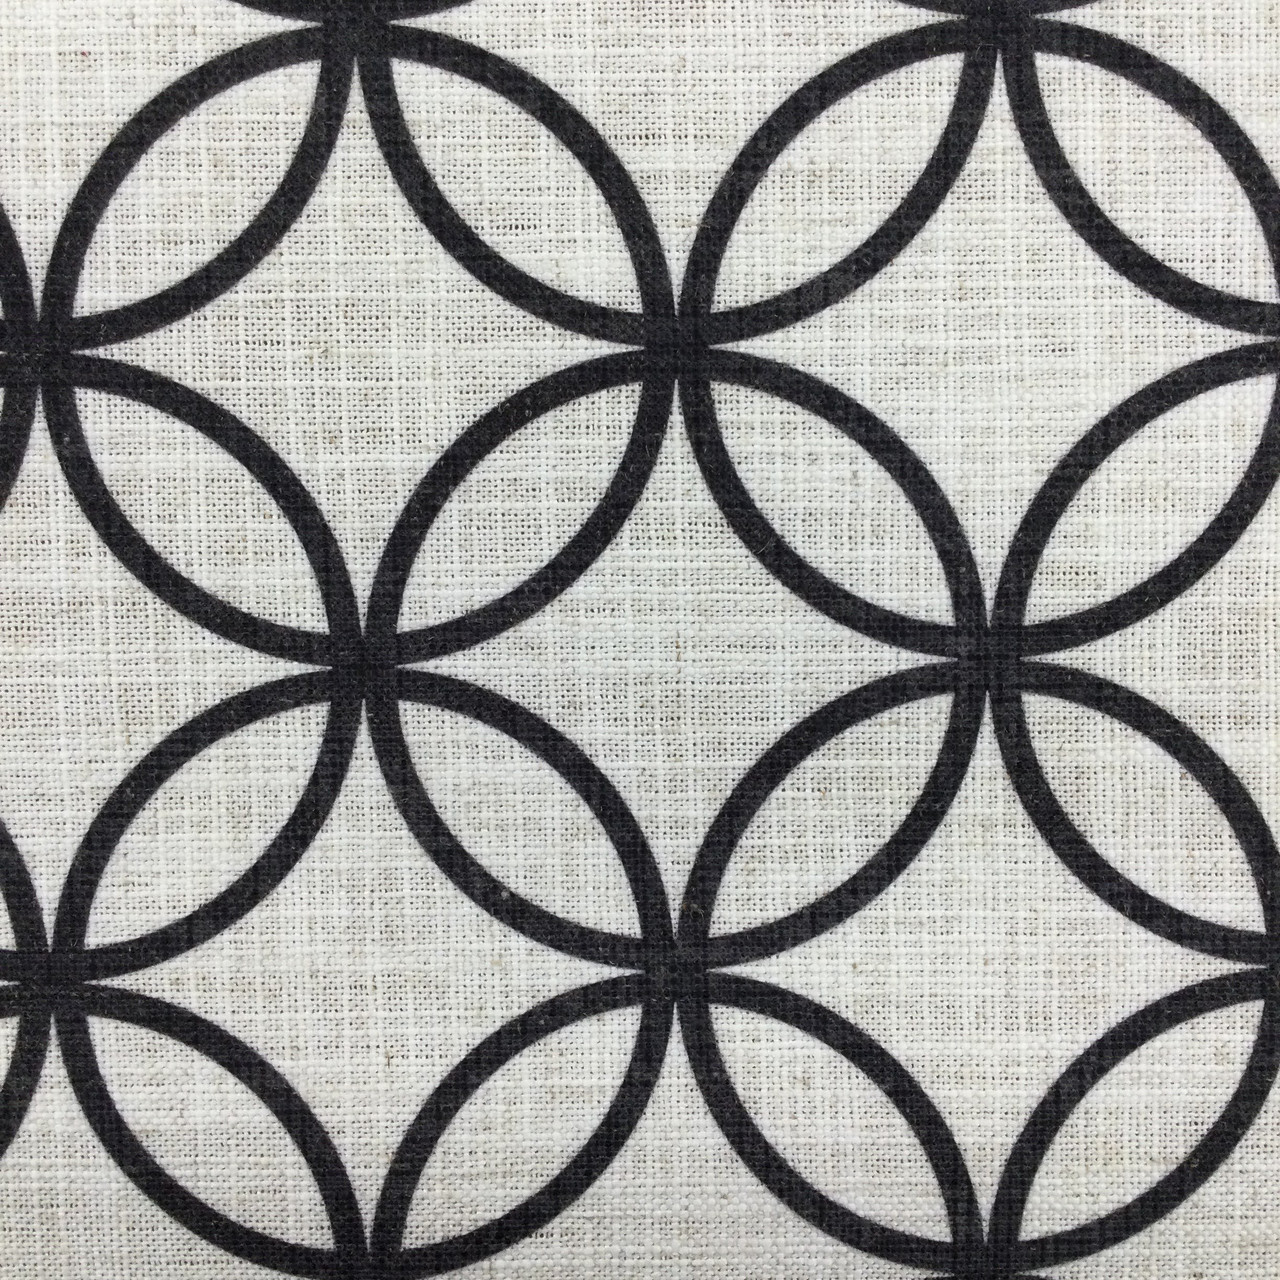  Polyester Lining Black Fabric by The Yard : Arts